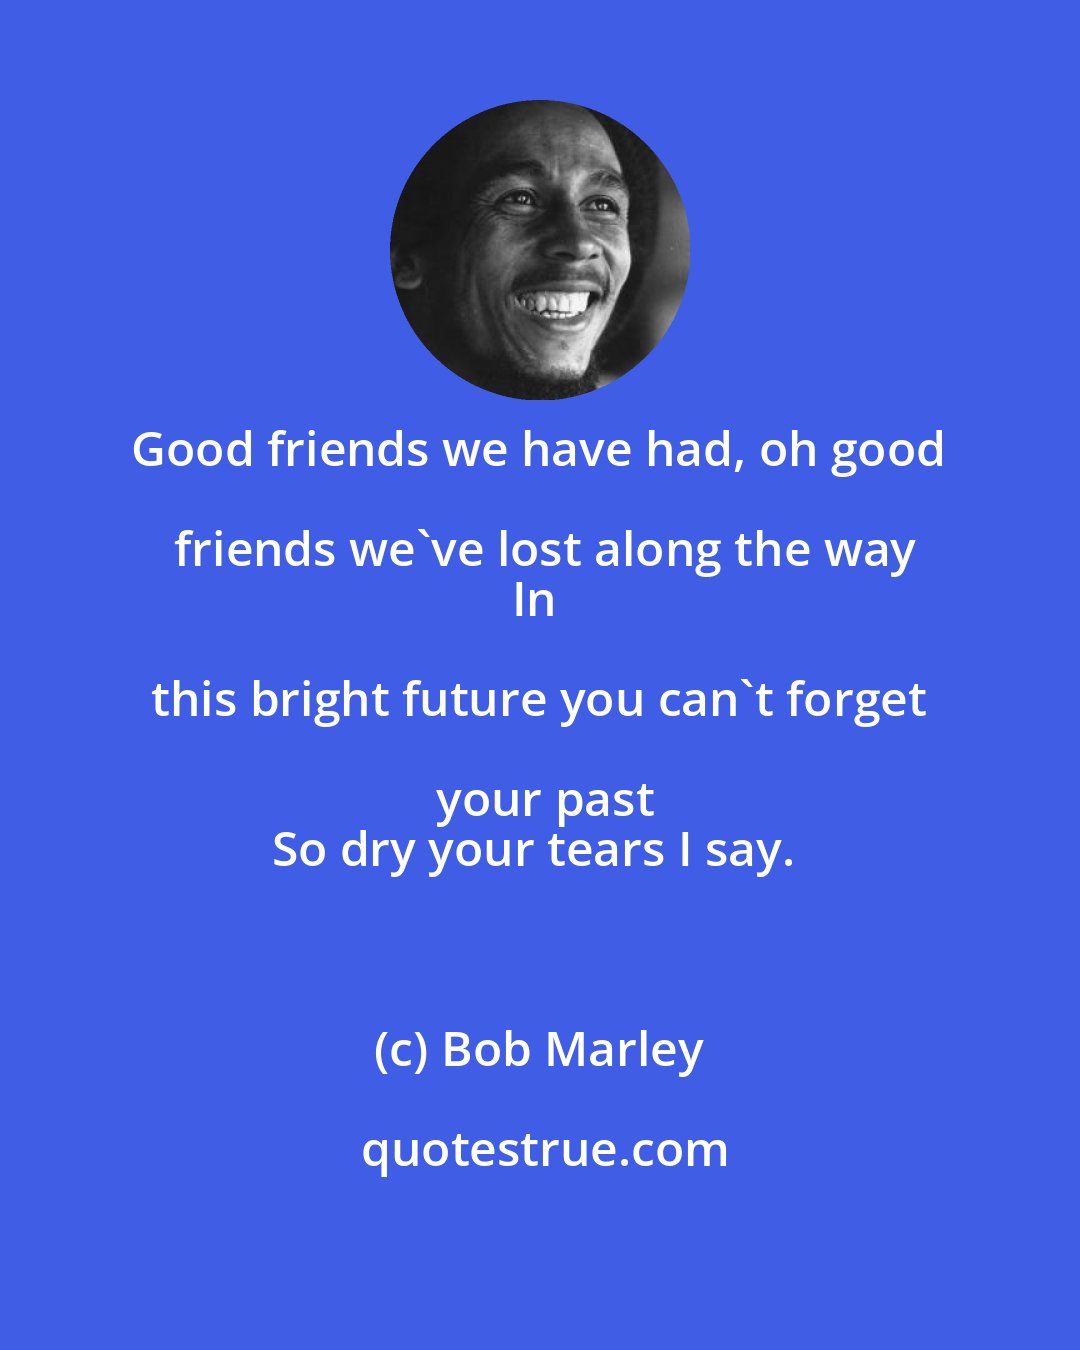 Bob Marley: Good friends we have had, oh good friends we've lost along the way
In this bright future you can't forget your past
So dry your tears I say.